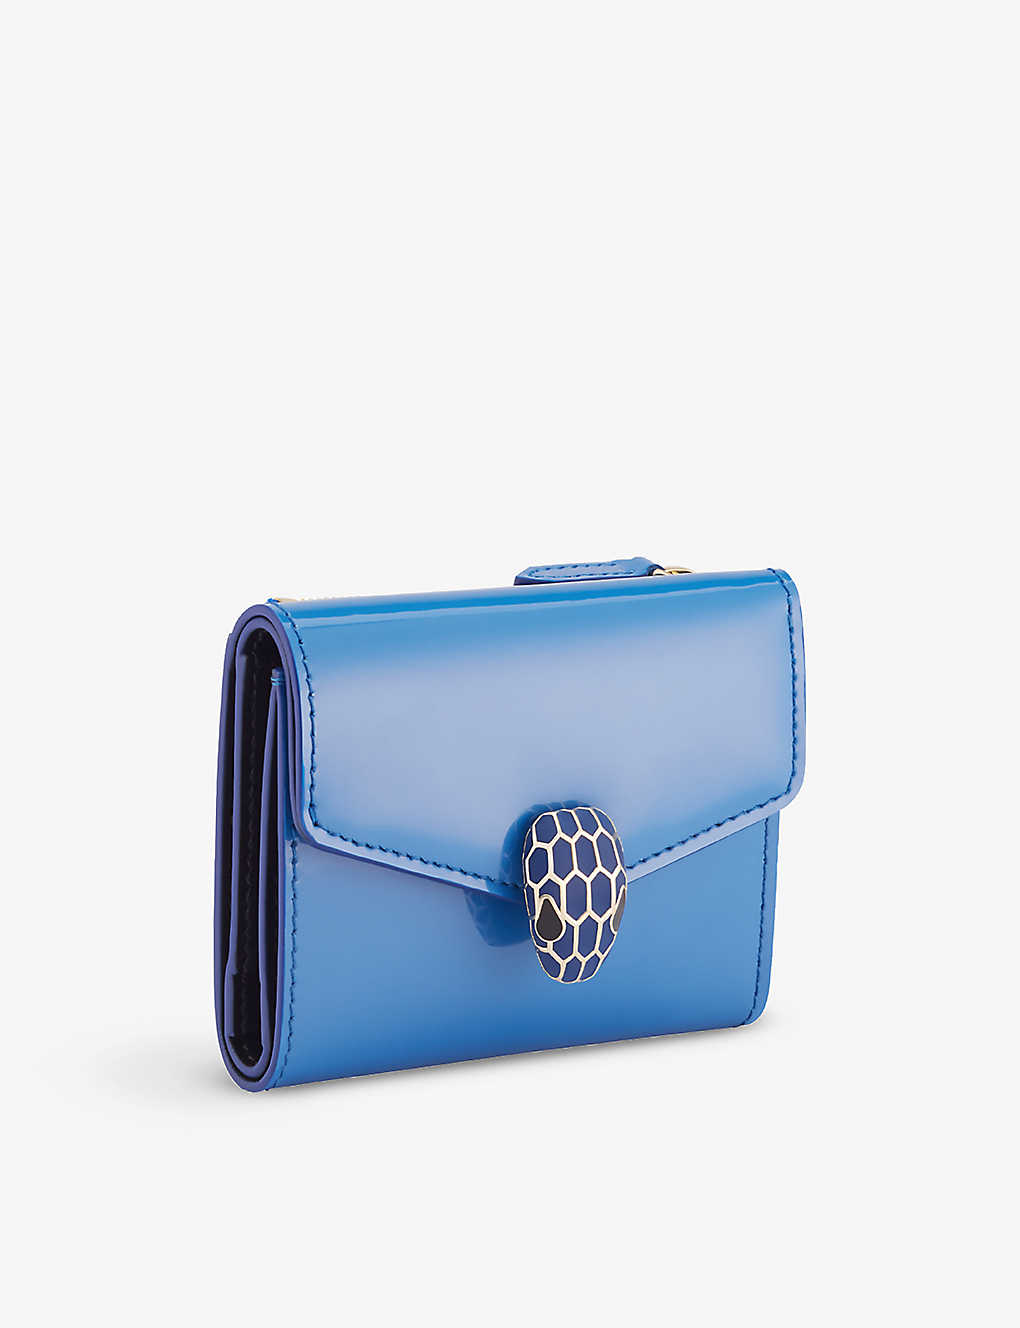 Bvlgari Serpenti Forever Compact Card Holder In Blue